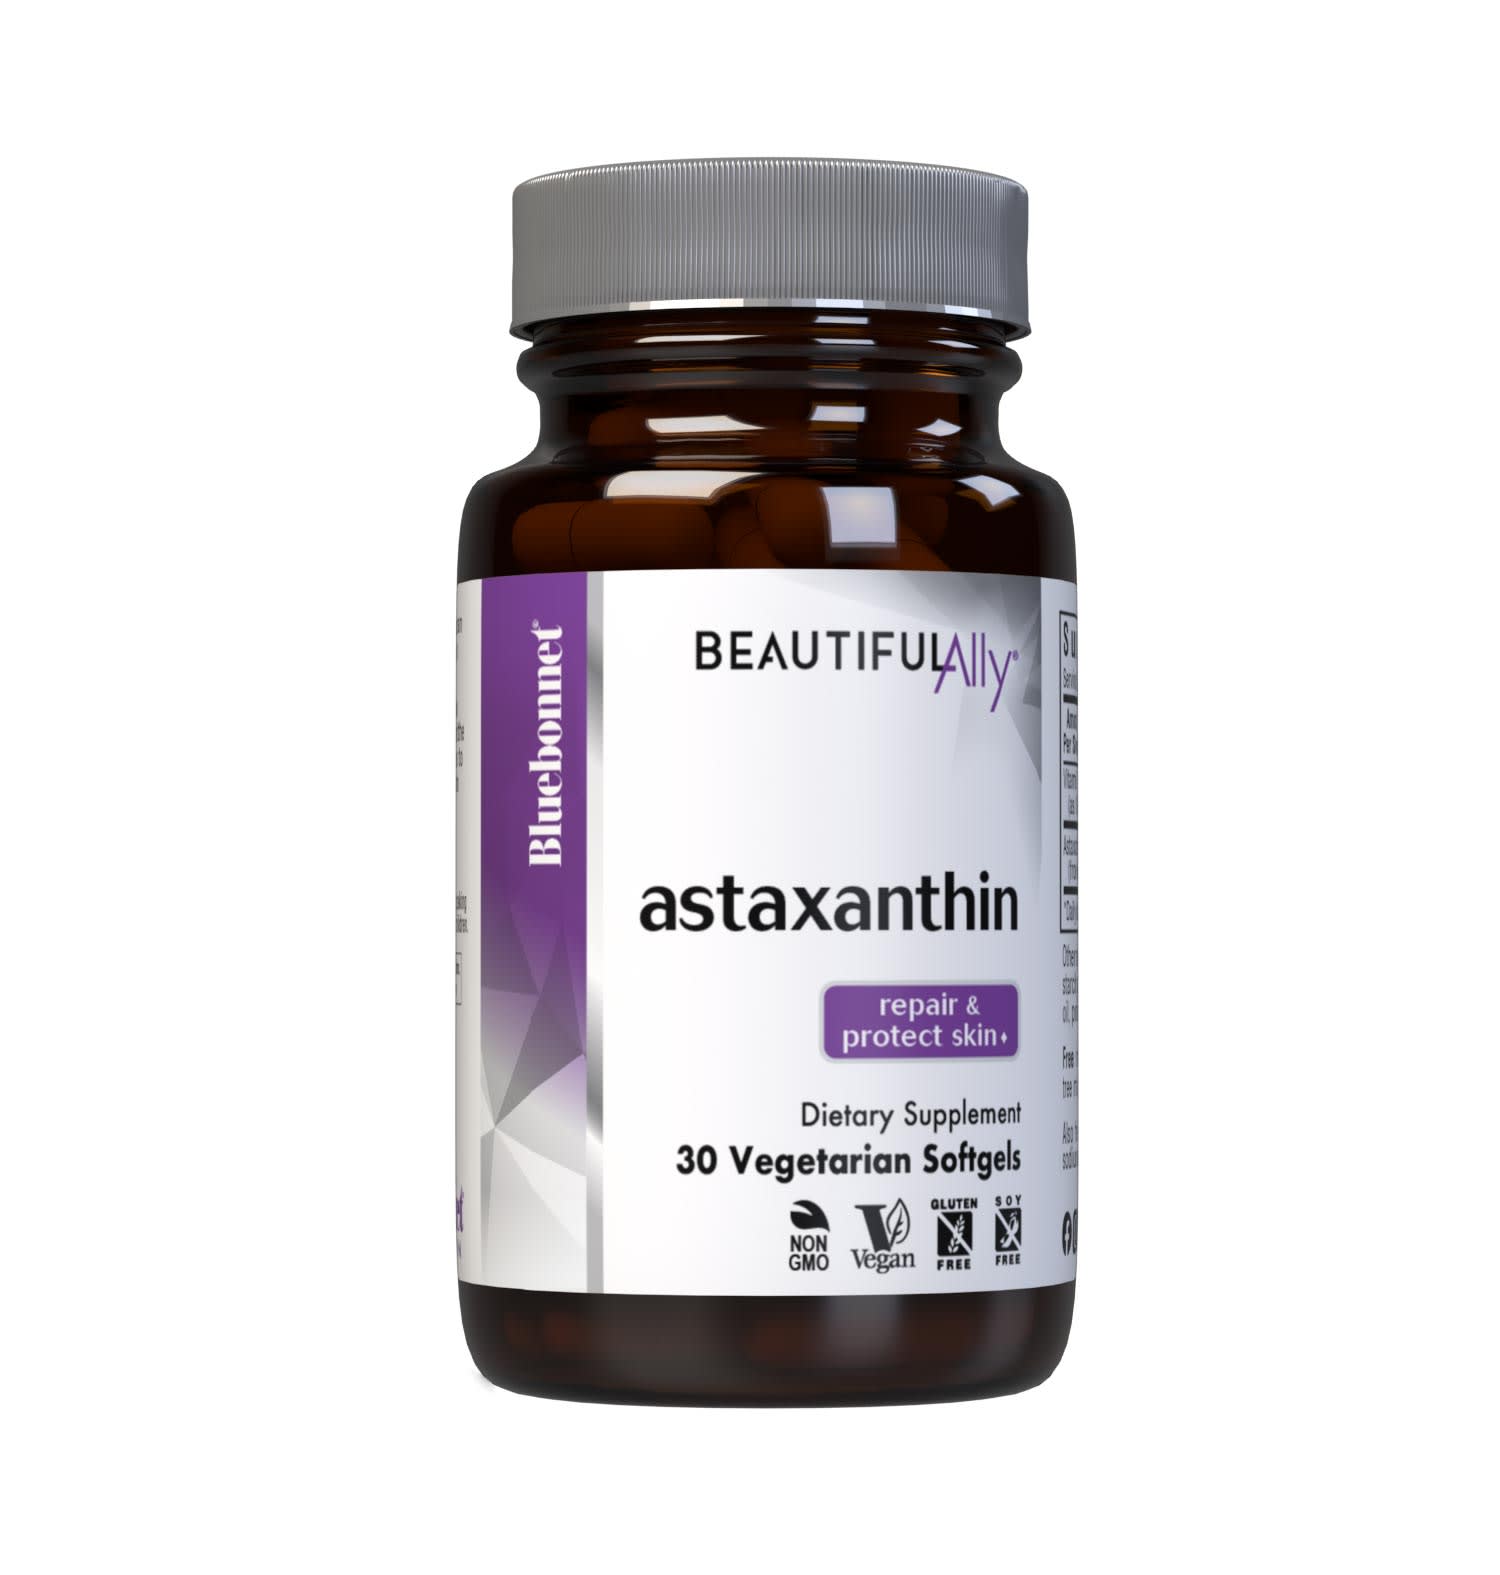 Bluebonnet’s Beautiful Ally Astaxanthin 30 Vegetarian Softgels are specially formulated to help repair and protect the skin from UV-induced oxidative stress that contributes to skin damage and aging with a vegan-based astaxanthin sustainably-sourced from marine algae. #size_30 count